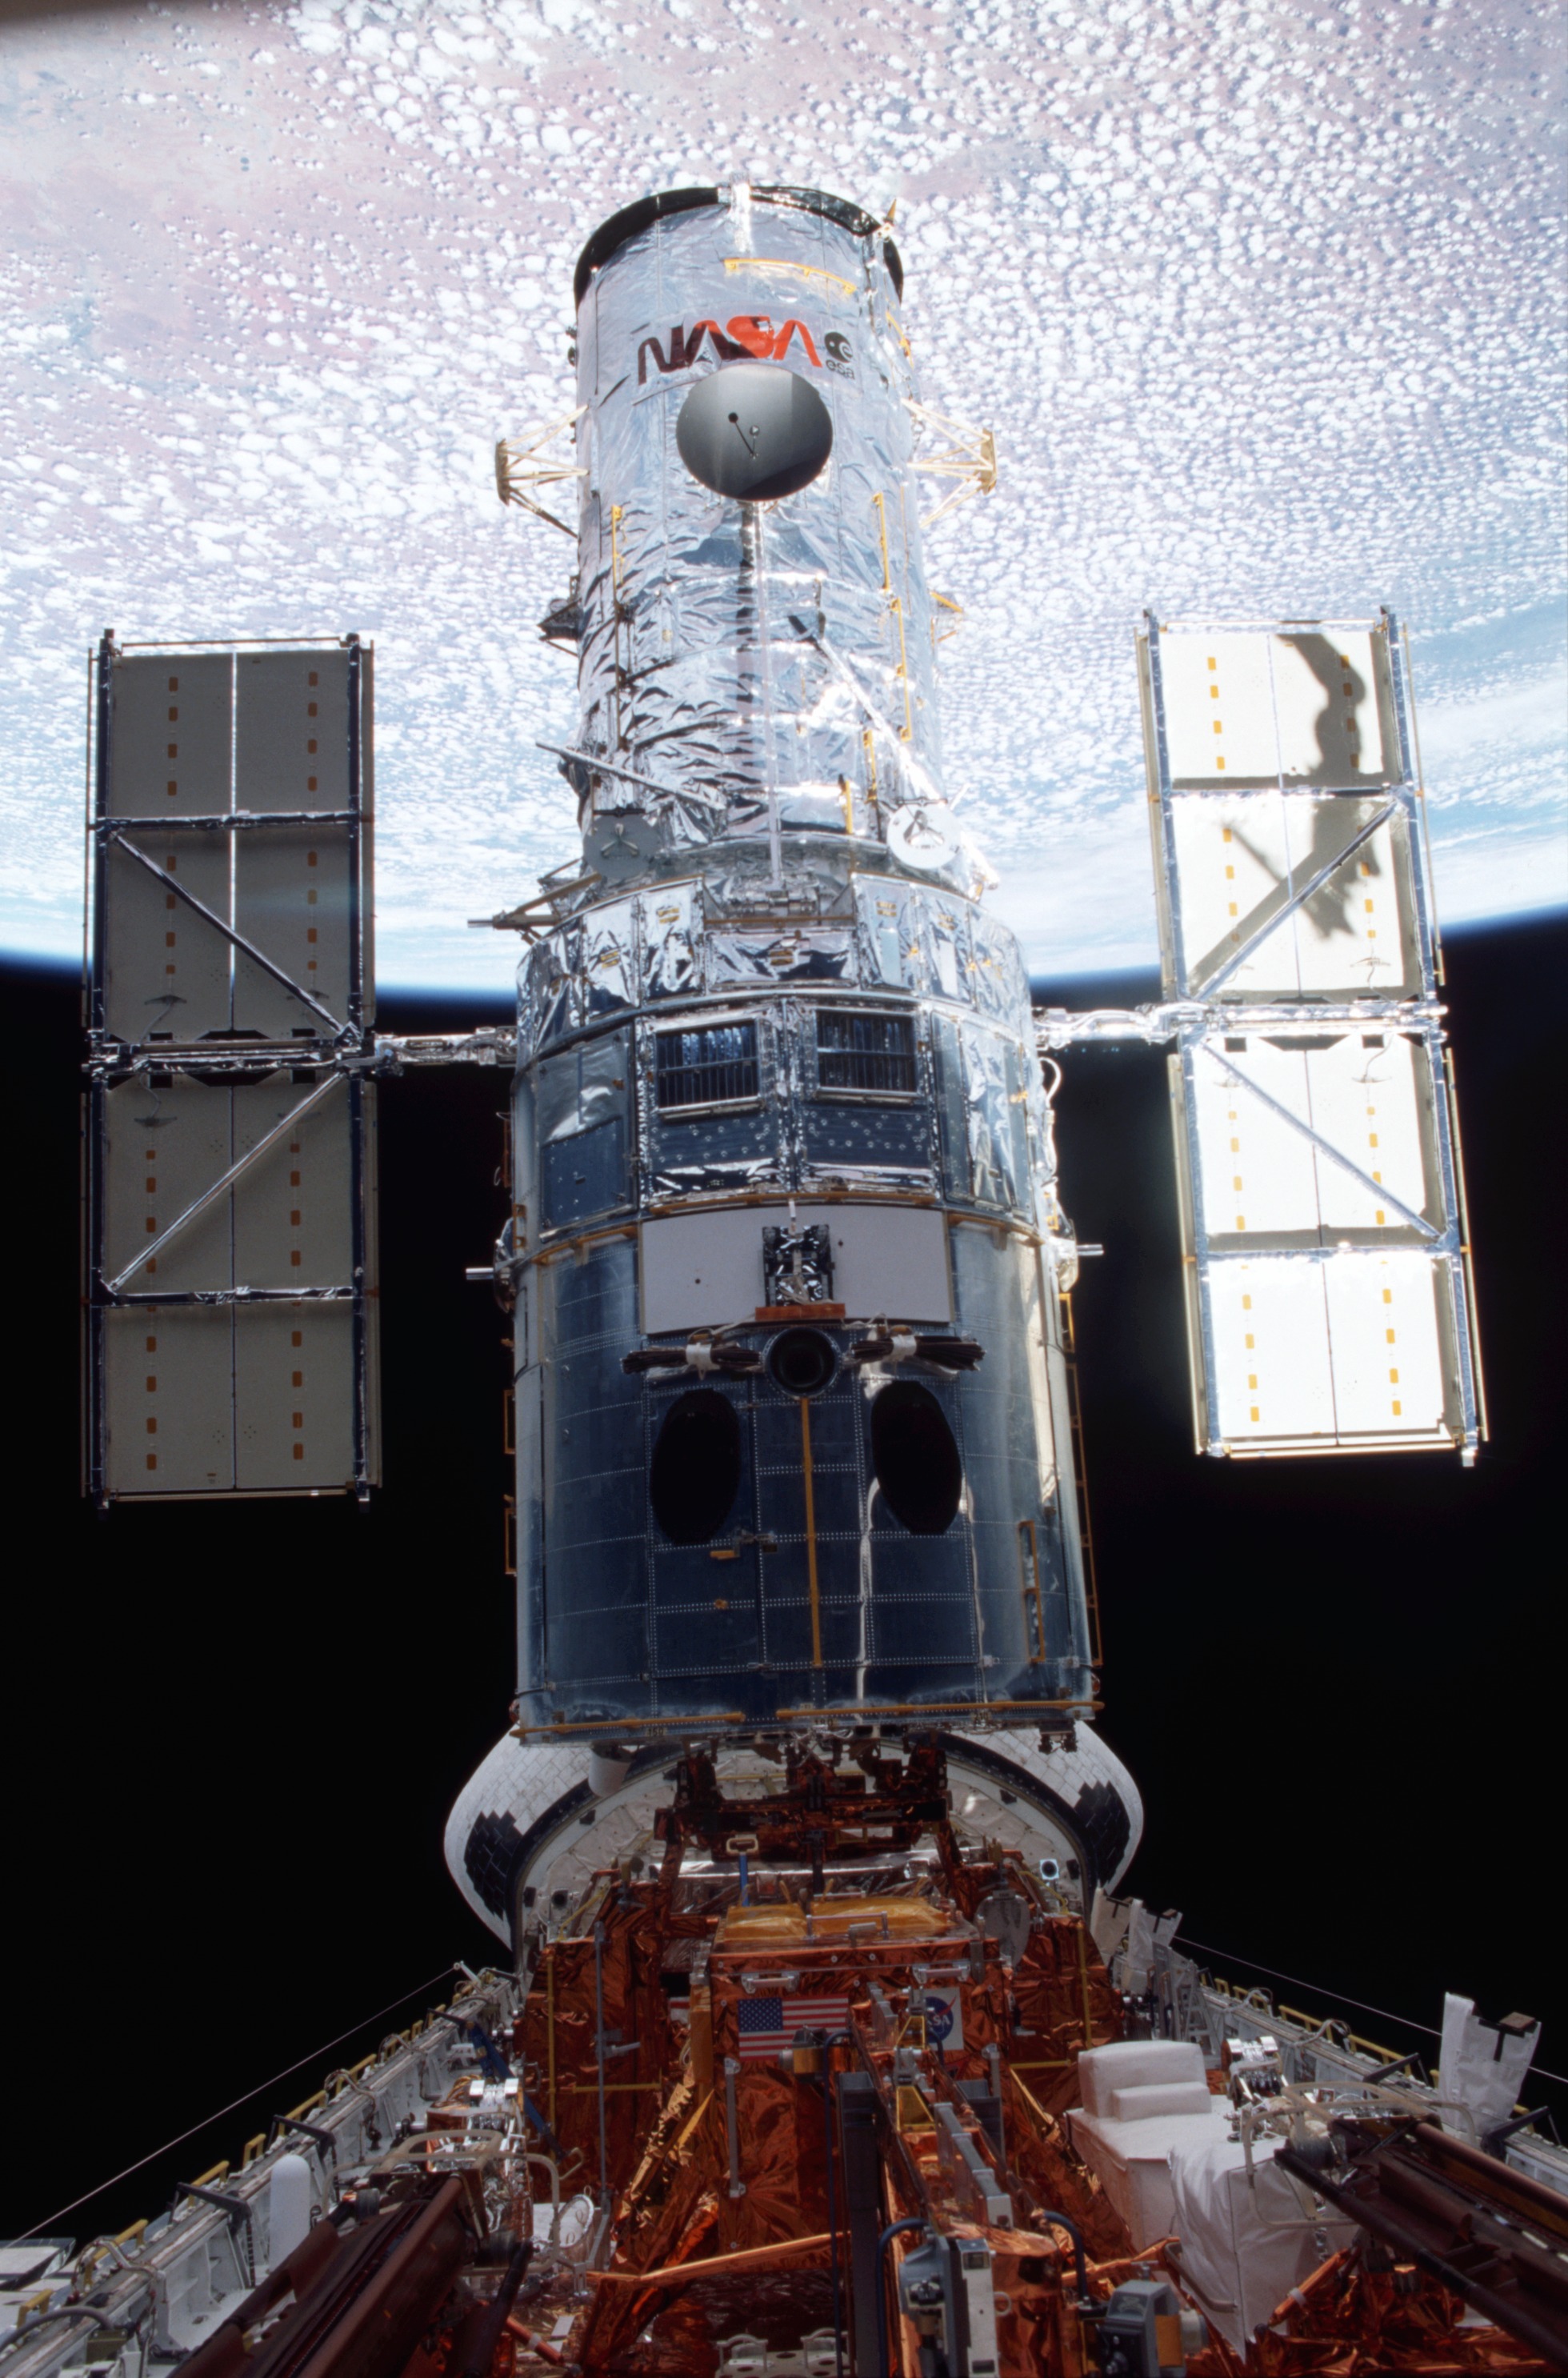 This week in 2002, the Hubble Space Telescope was redeployed following five days of service and upgrades. 